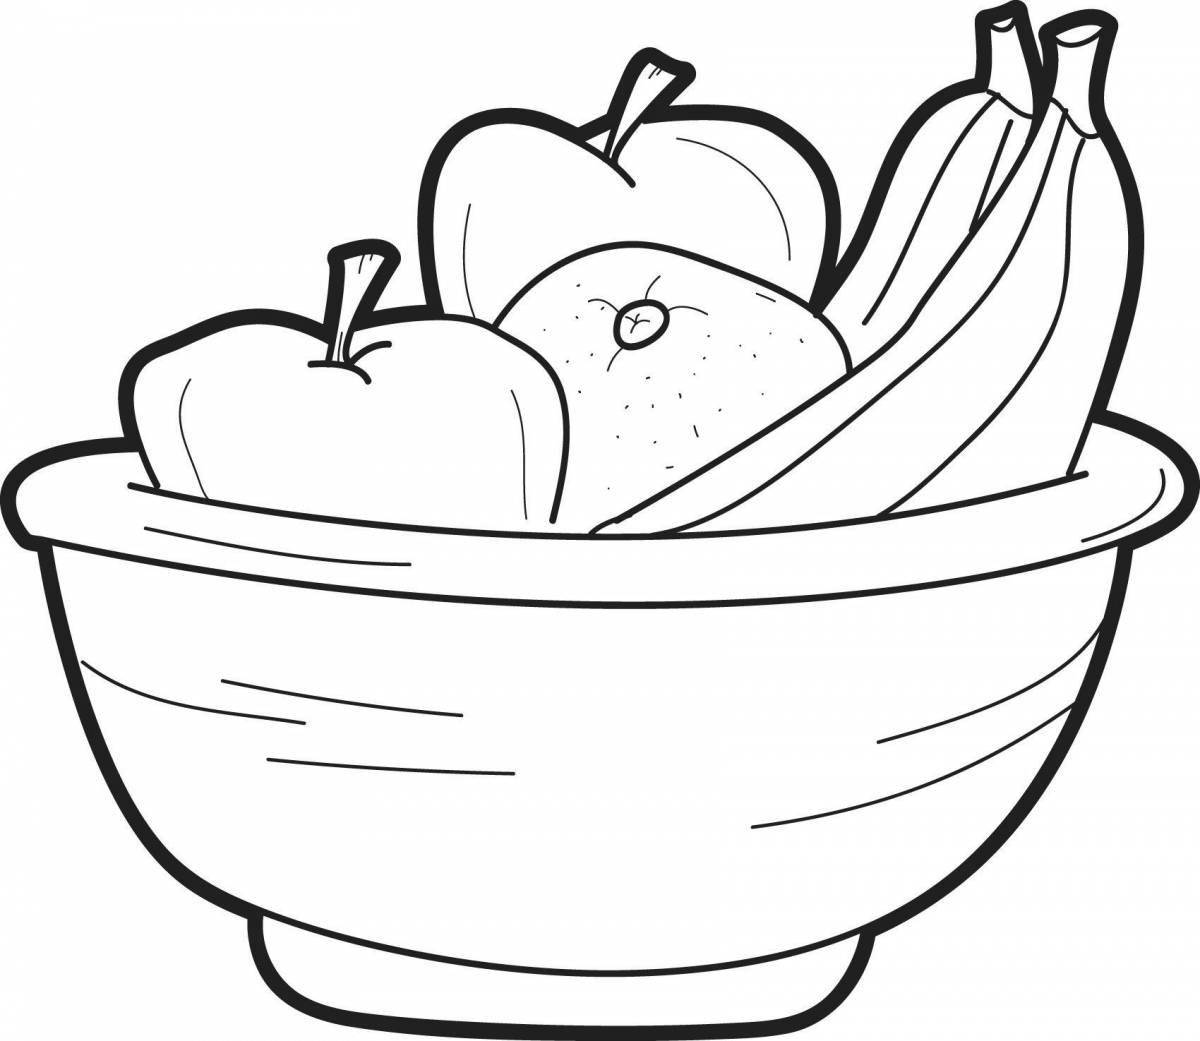 Colorful fruit salad coloring page